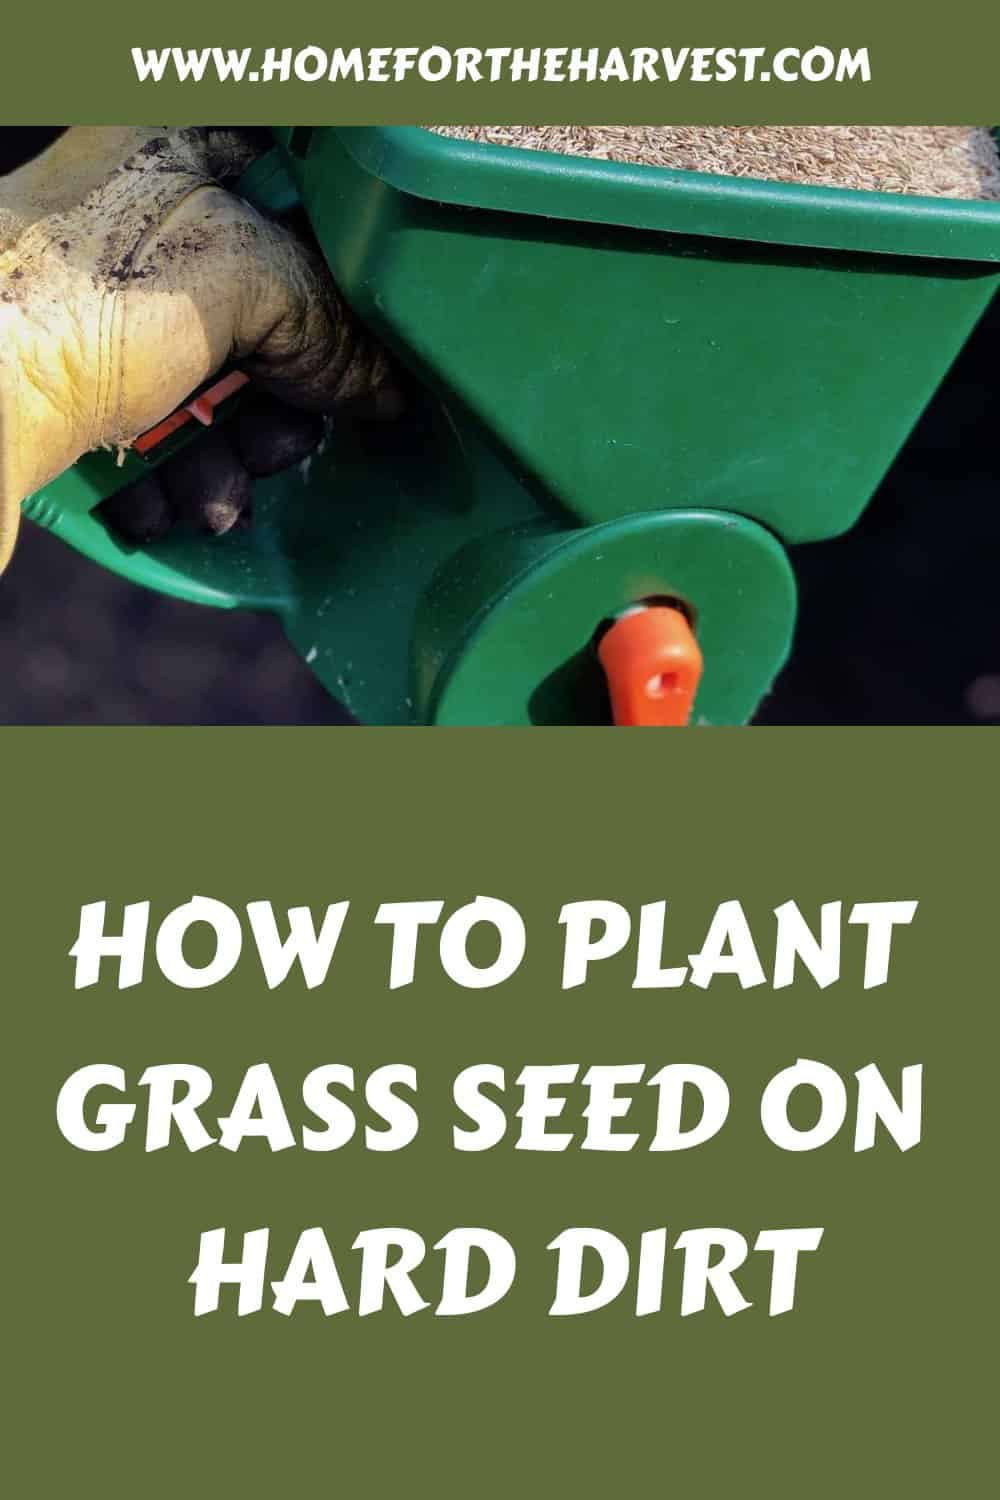 How to plant grass seed on hard dirt generated pin 5630